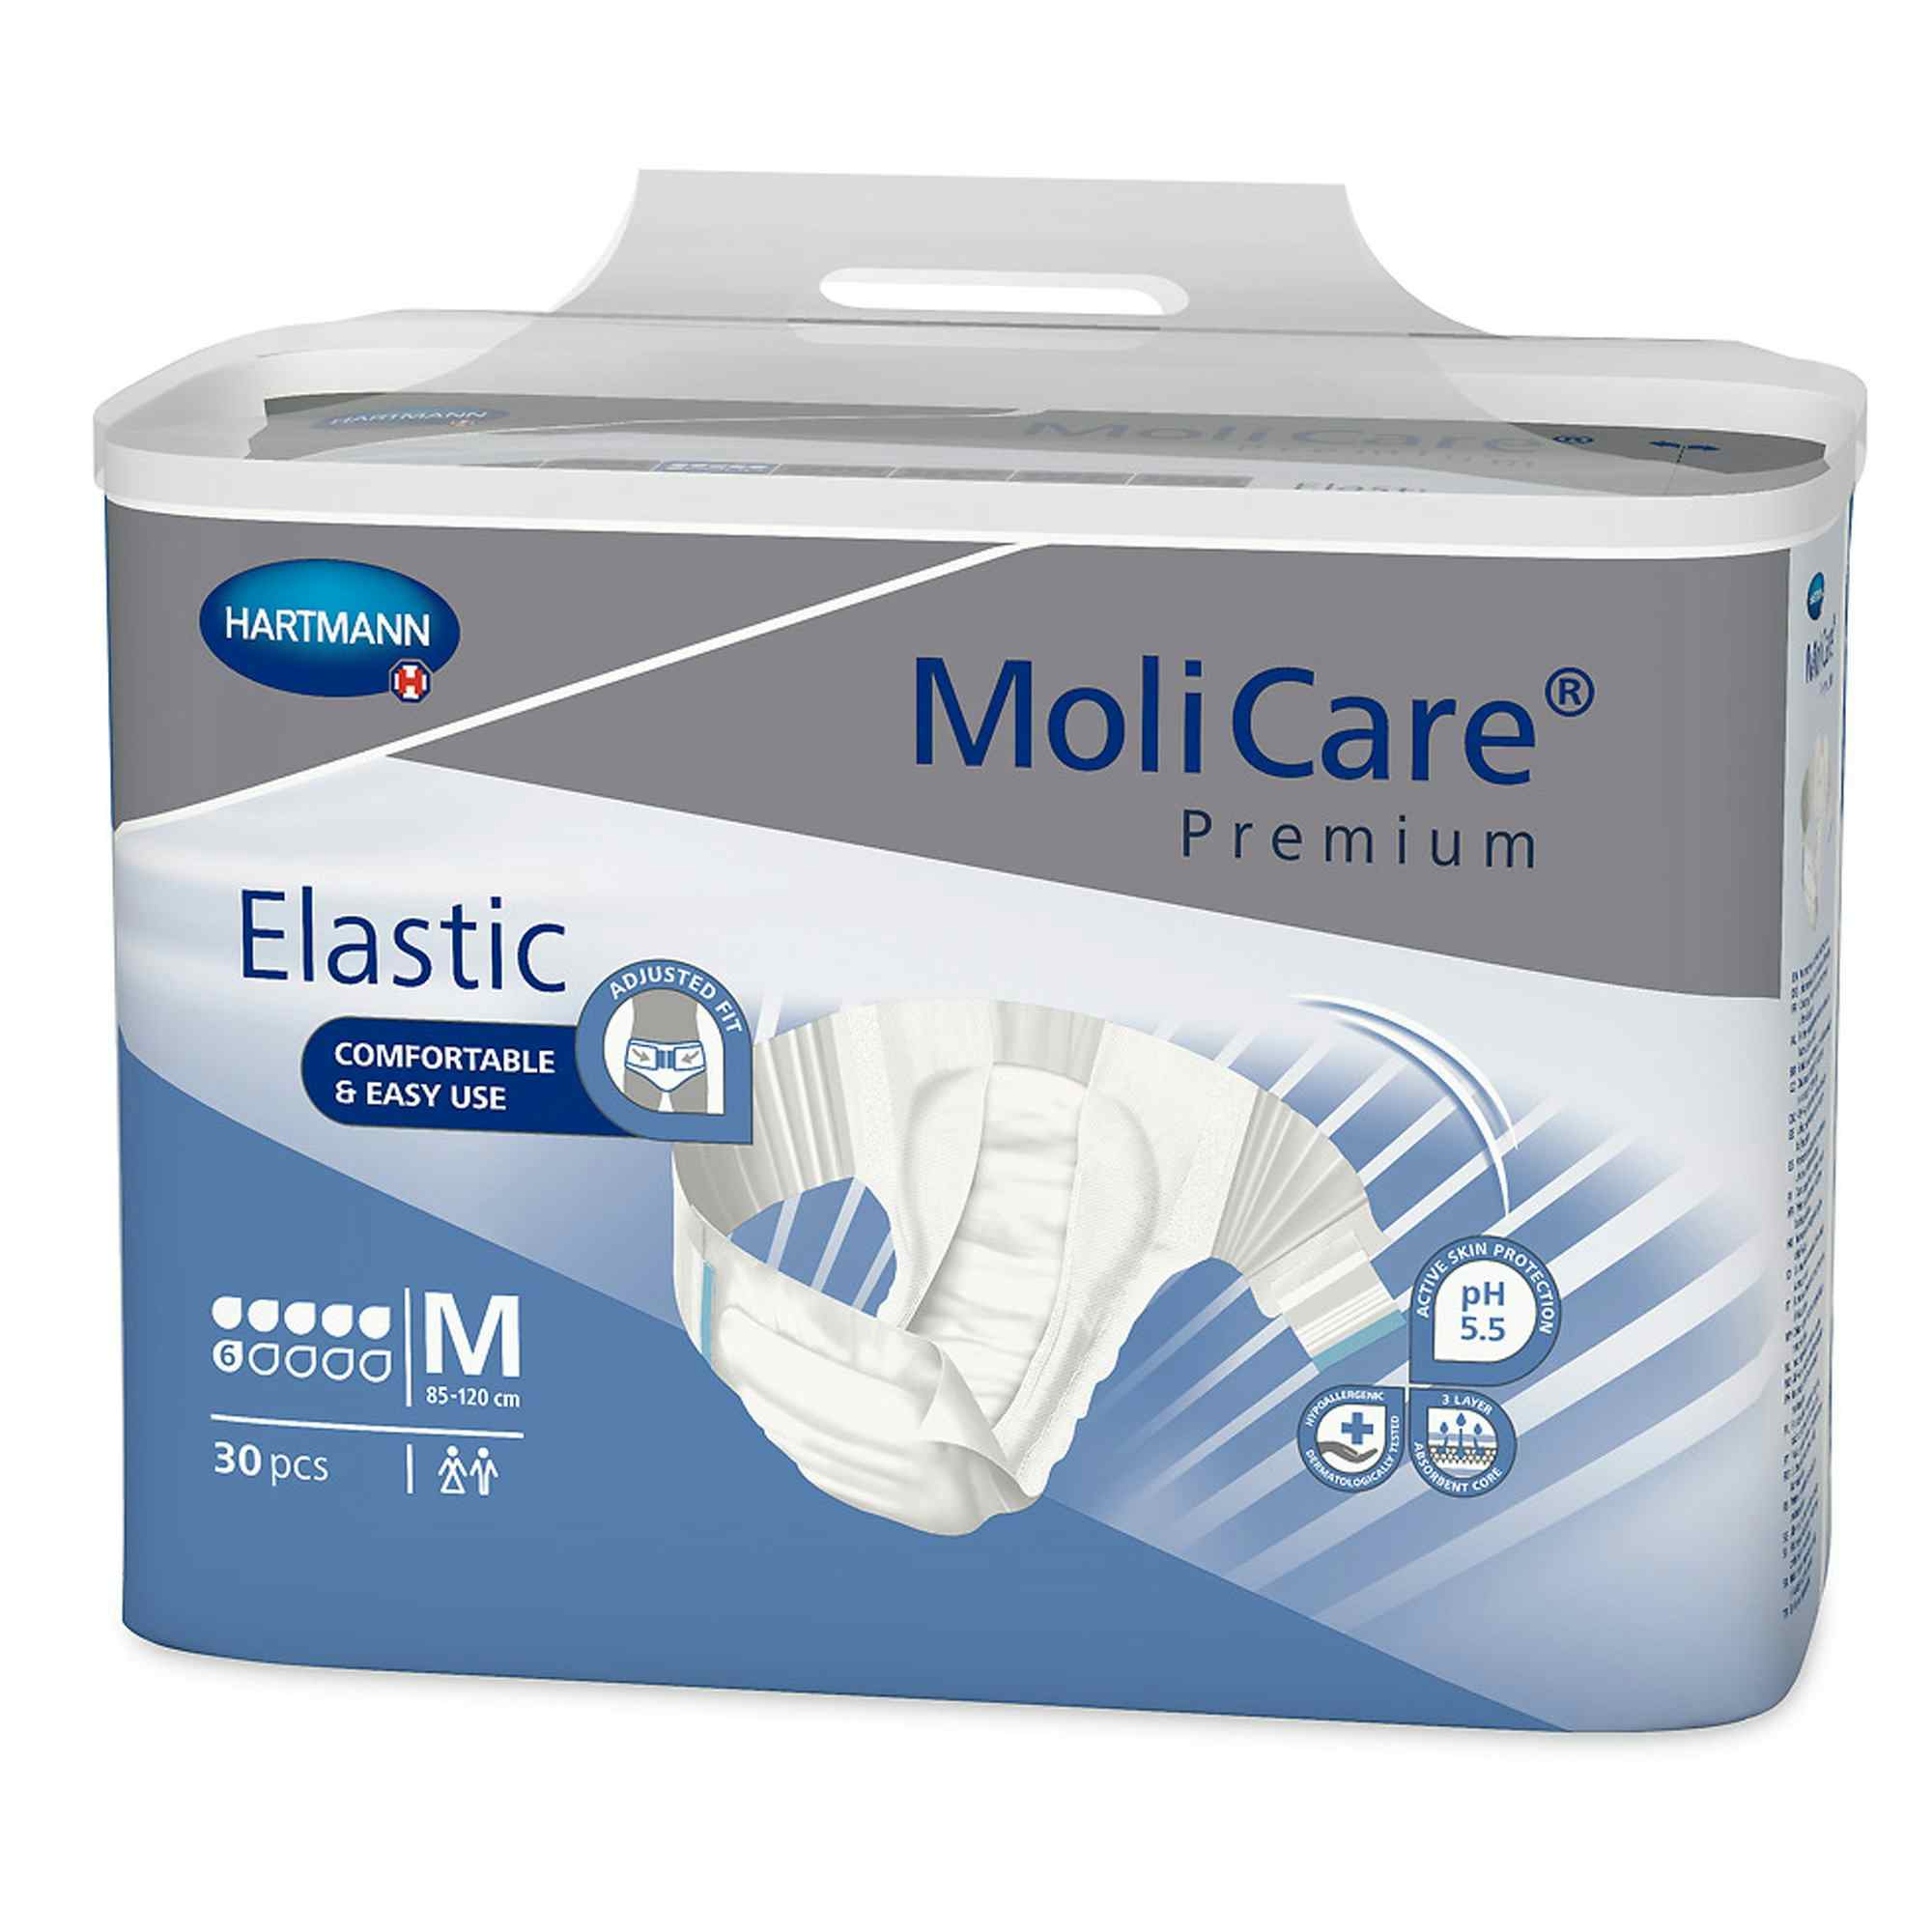 MoliCare Premium Elastic 6D Disposable Brief Adult Diapers with Tabs, Moderate Absorbency, 165272, Medium (33-47") - Bag of 30